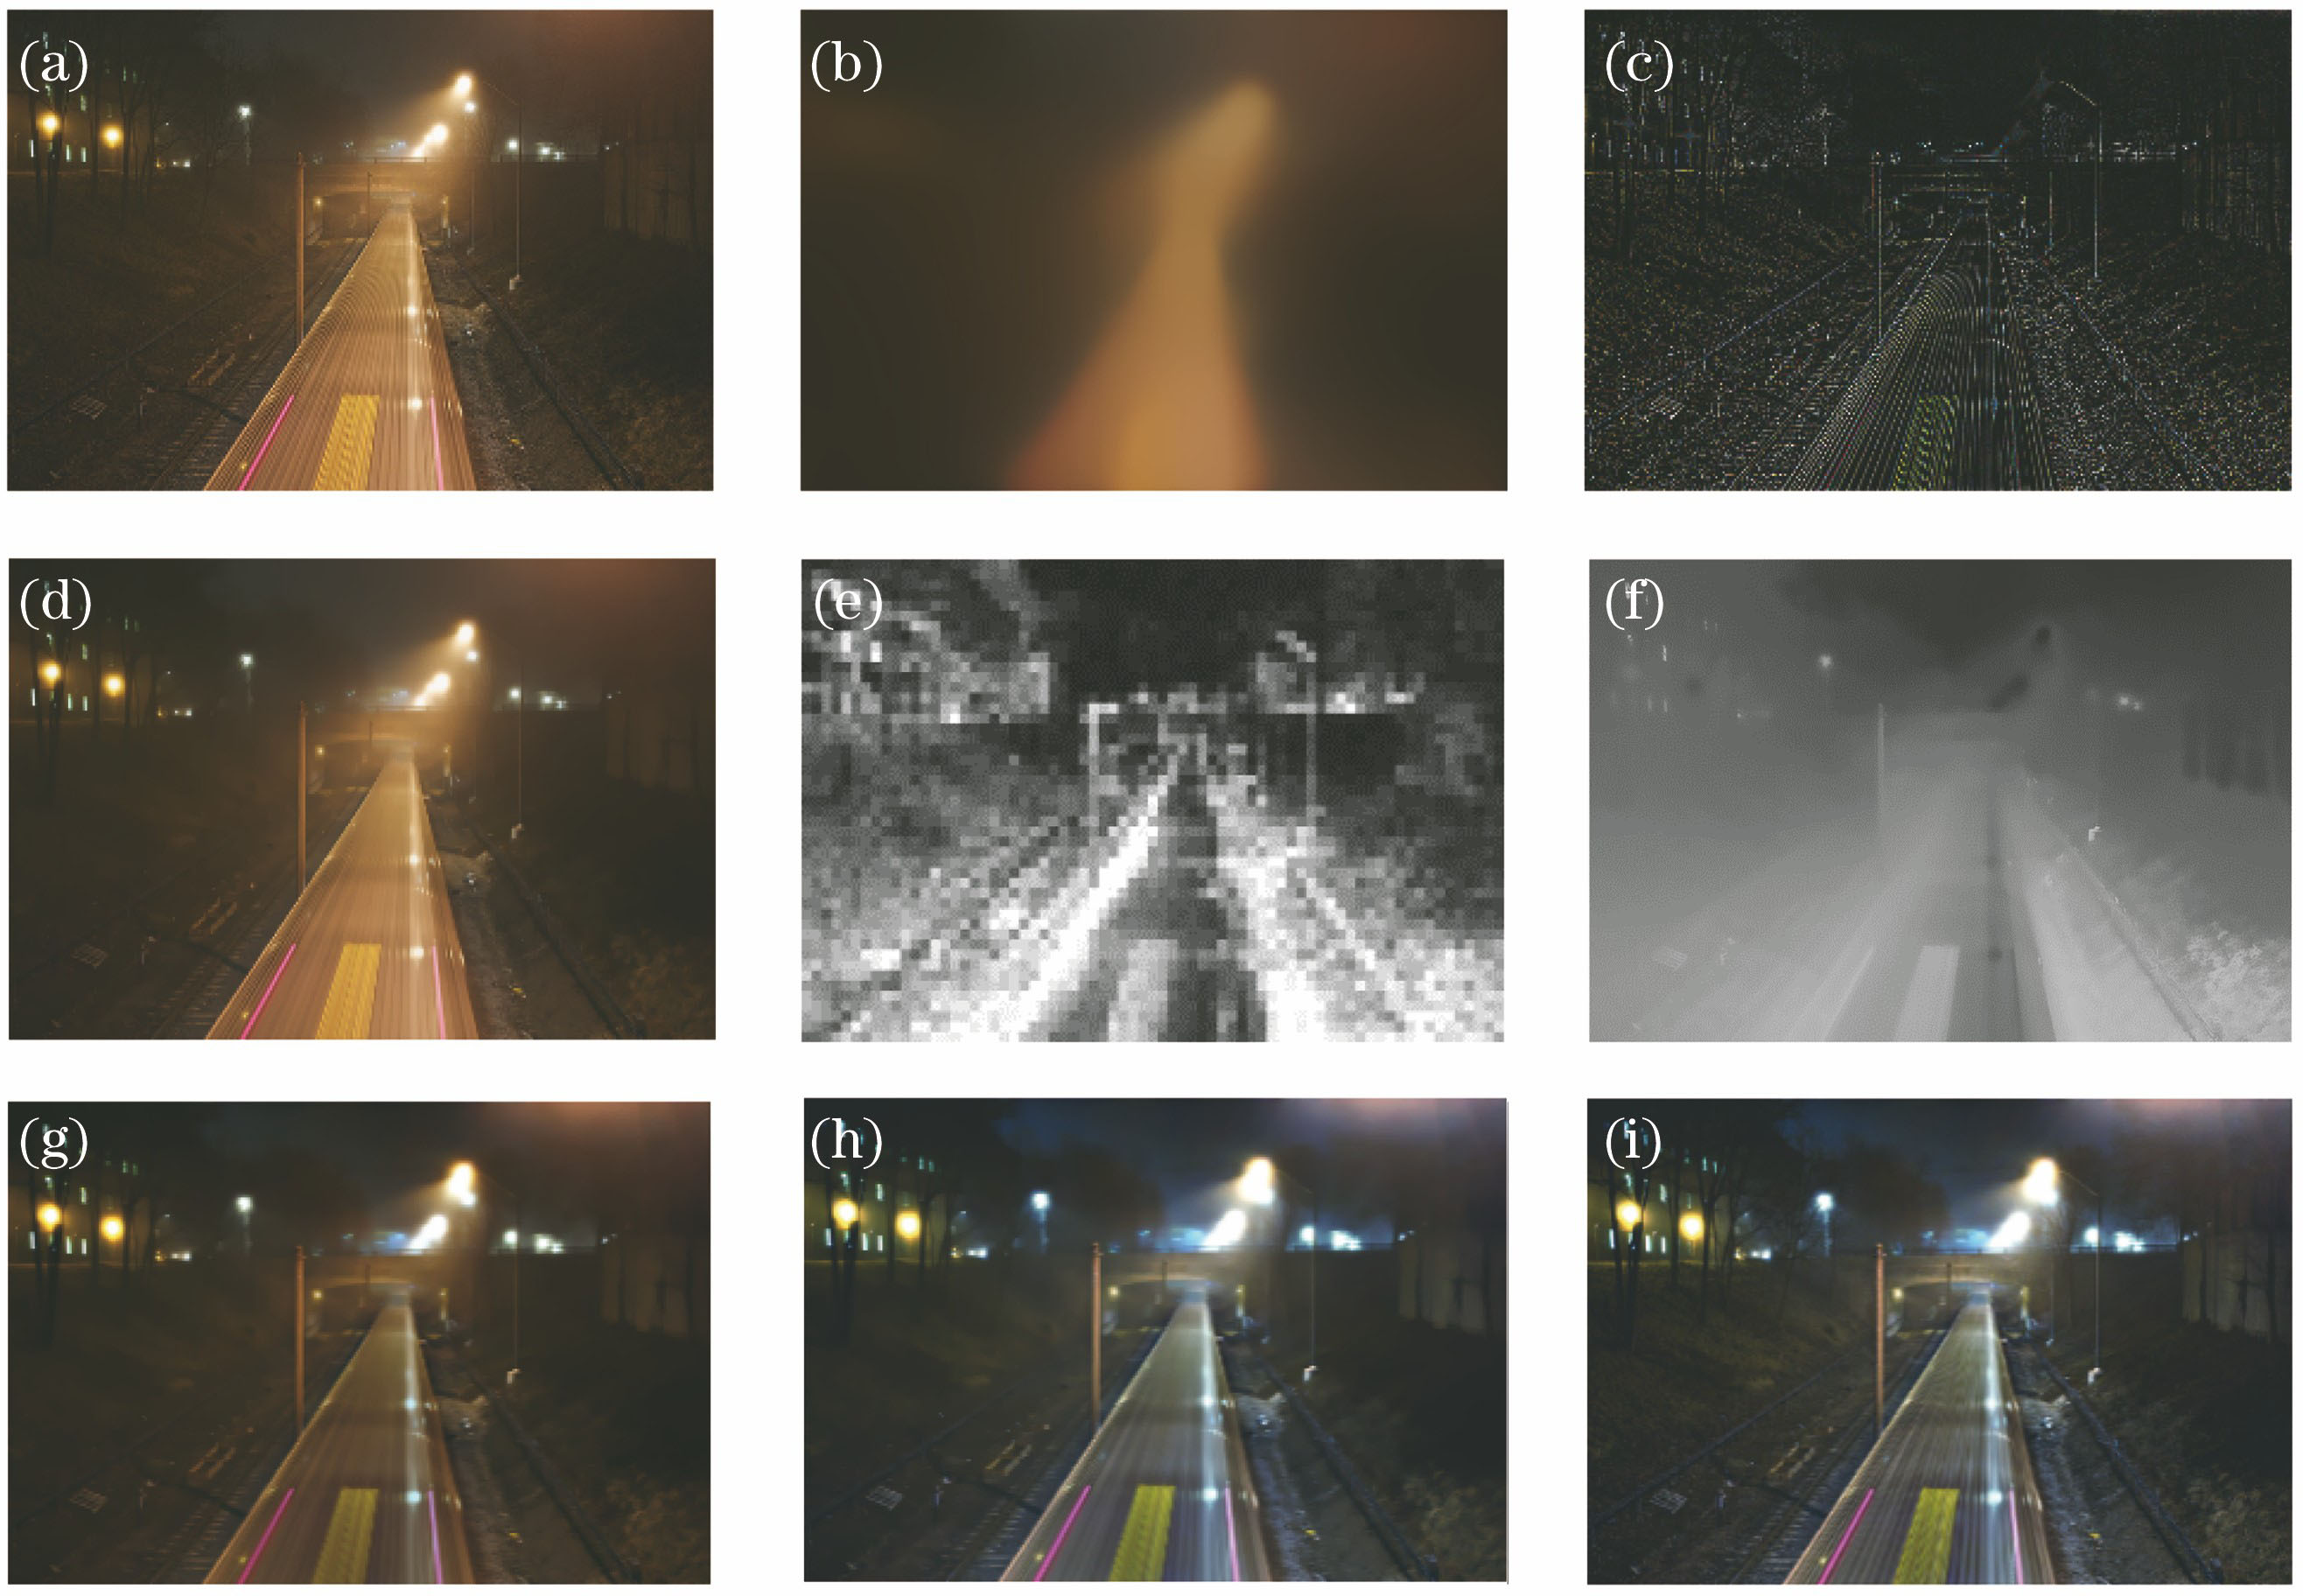 Results of steps in the proposed method. (a) Nighttime haze image; (b) atmospheric light; (c) texture layer; (d) structure layer; (e) initial transmission; (f) transmission; (g) haze-free structure layer; (h) haze-free structure layer after color correction; (i) final result